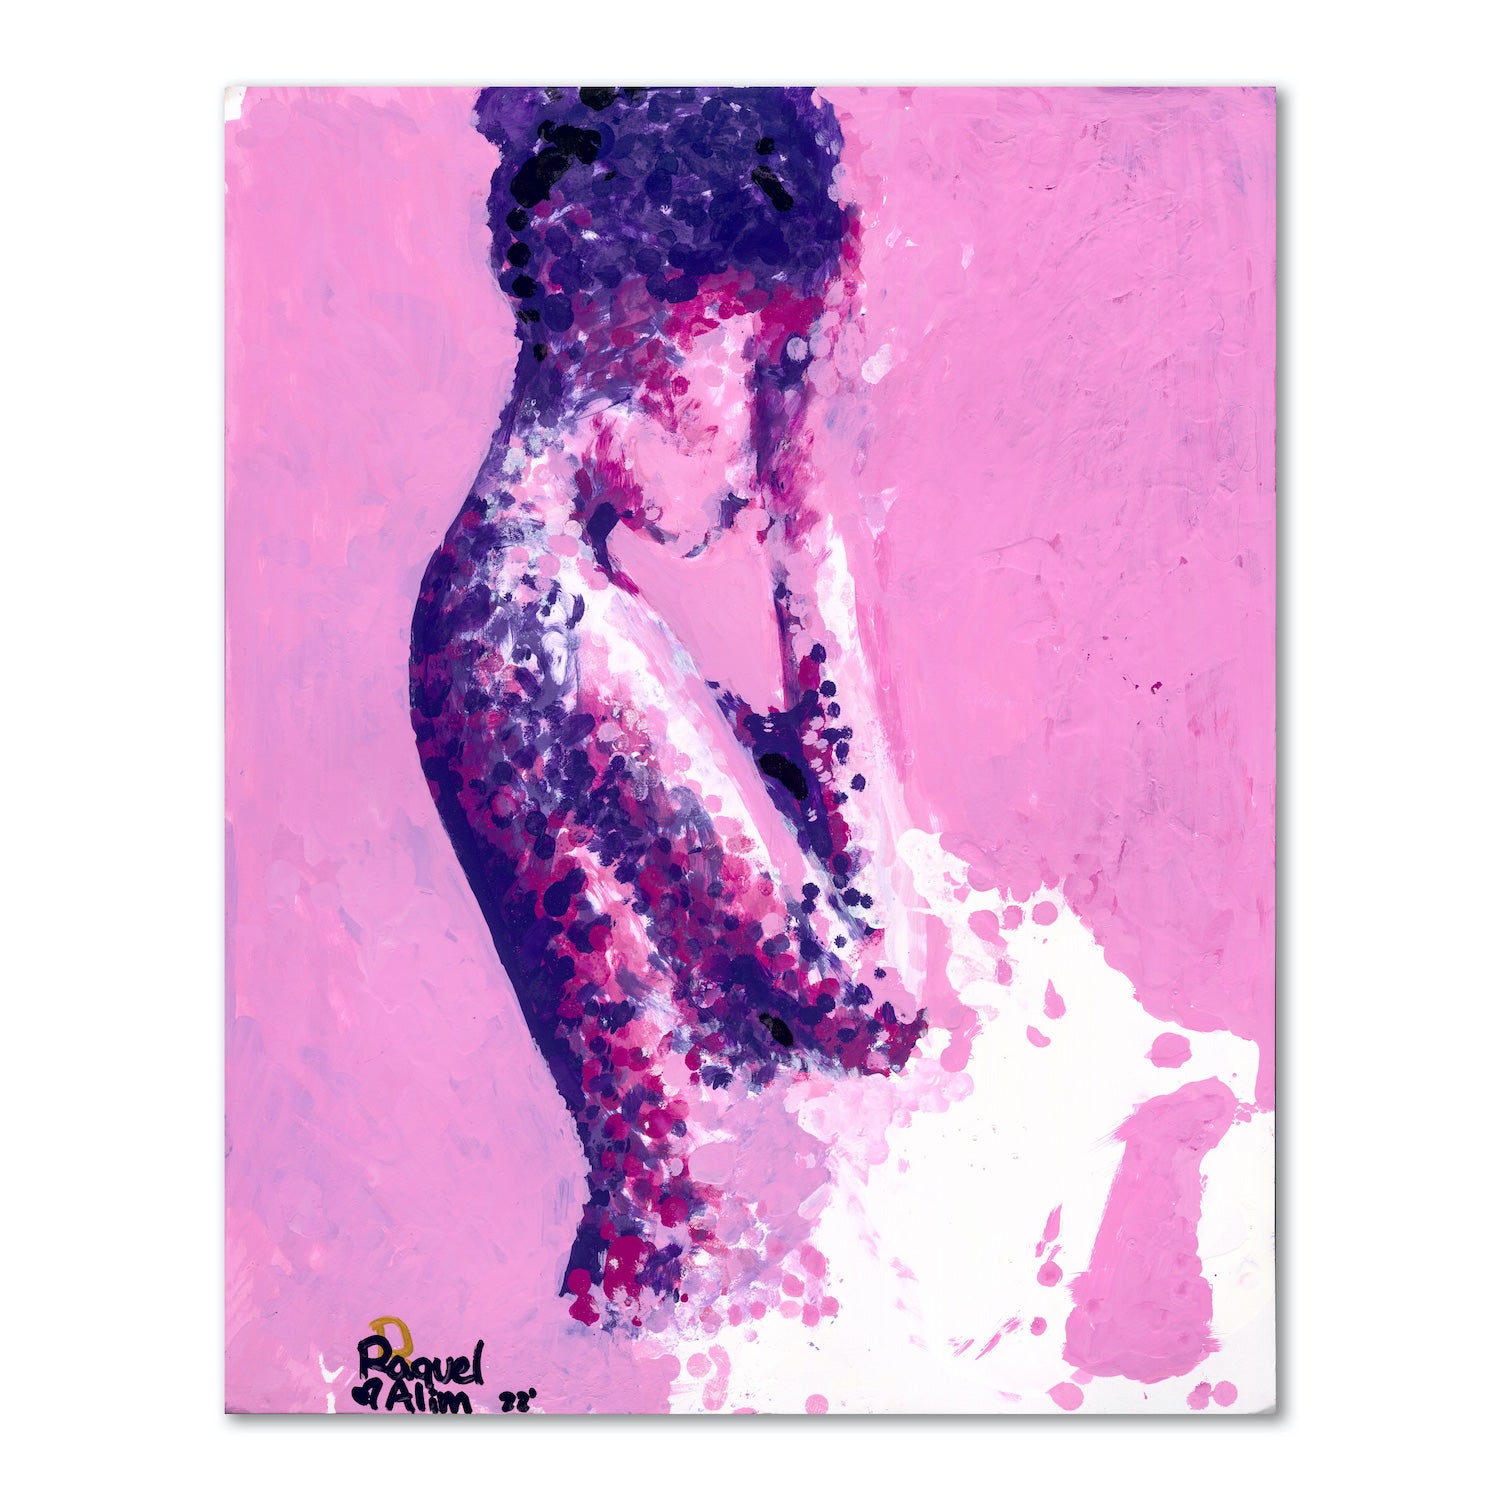 Strength and Courage ( Pink Lady ) ( SOLD )